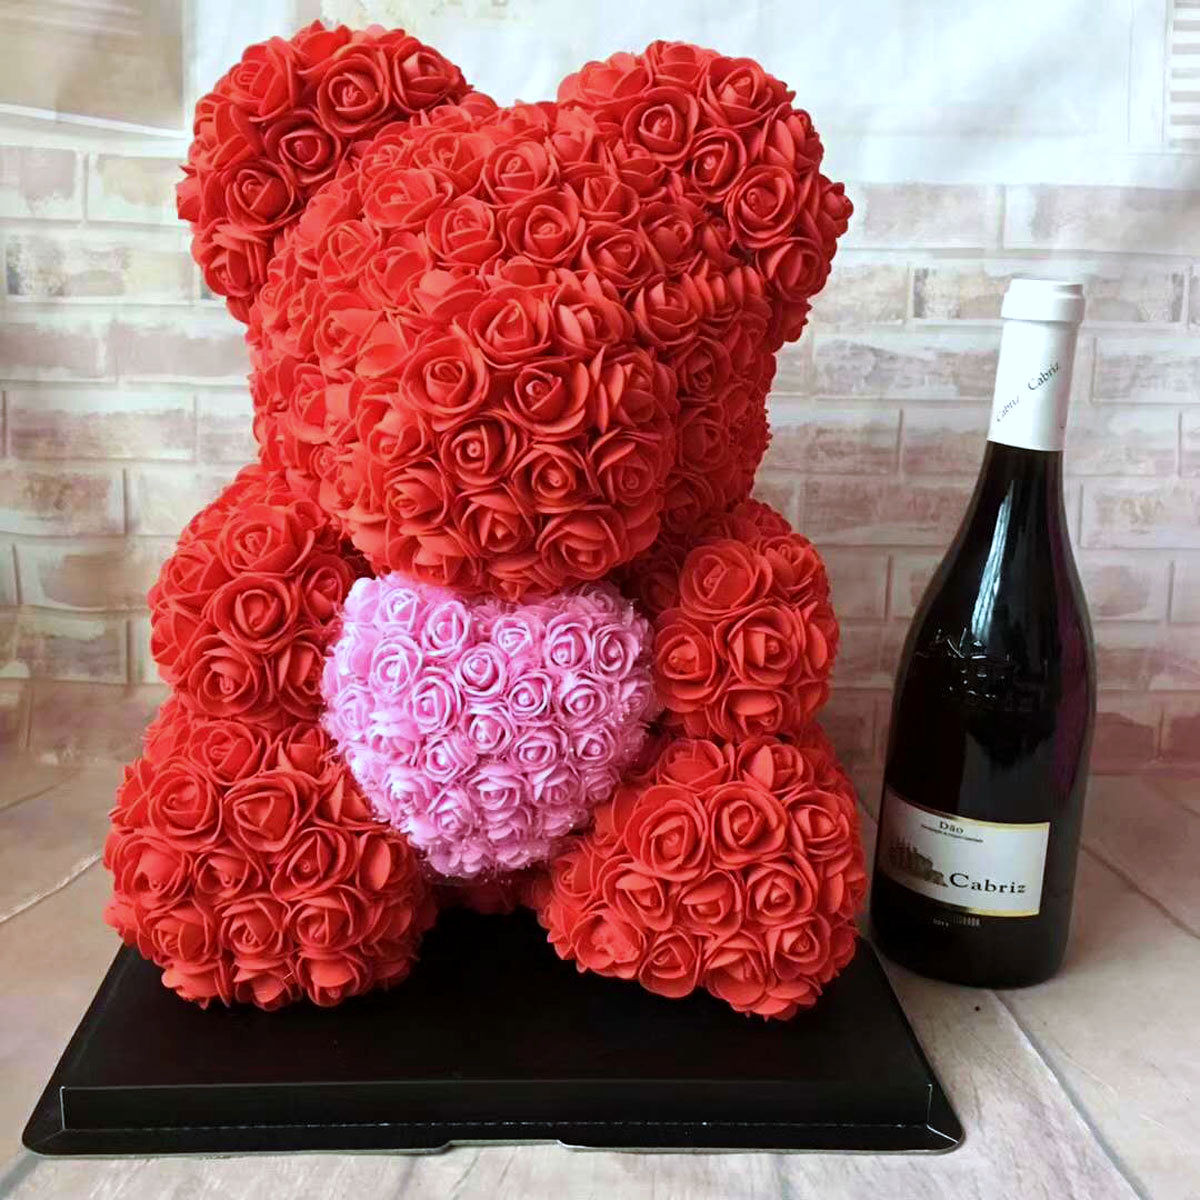 Romantic Valentines Day Gift Ideas For Her
 9 Wine Valentines Day Gift Ideas for Her